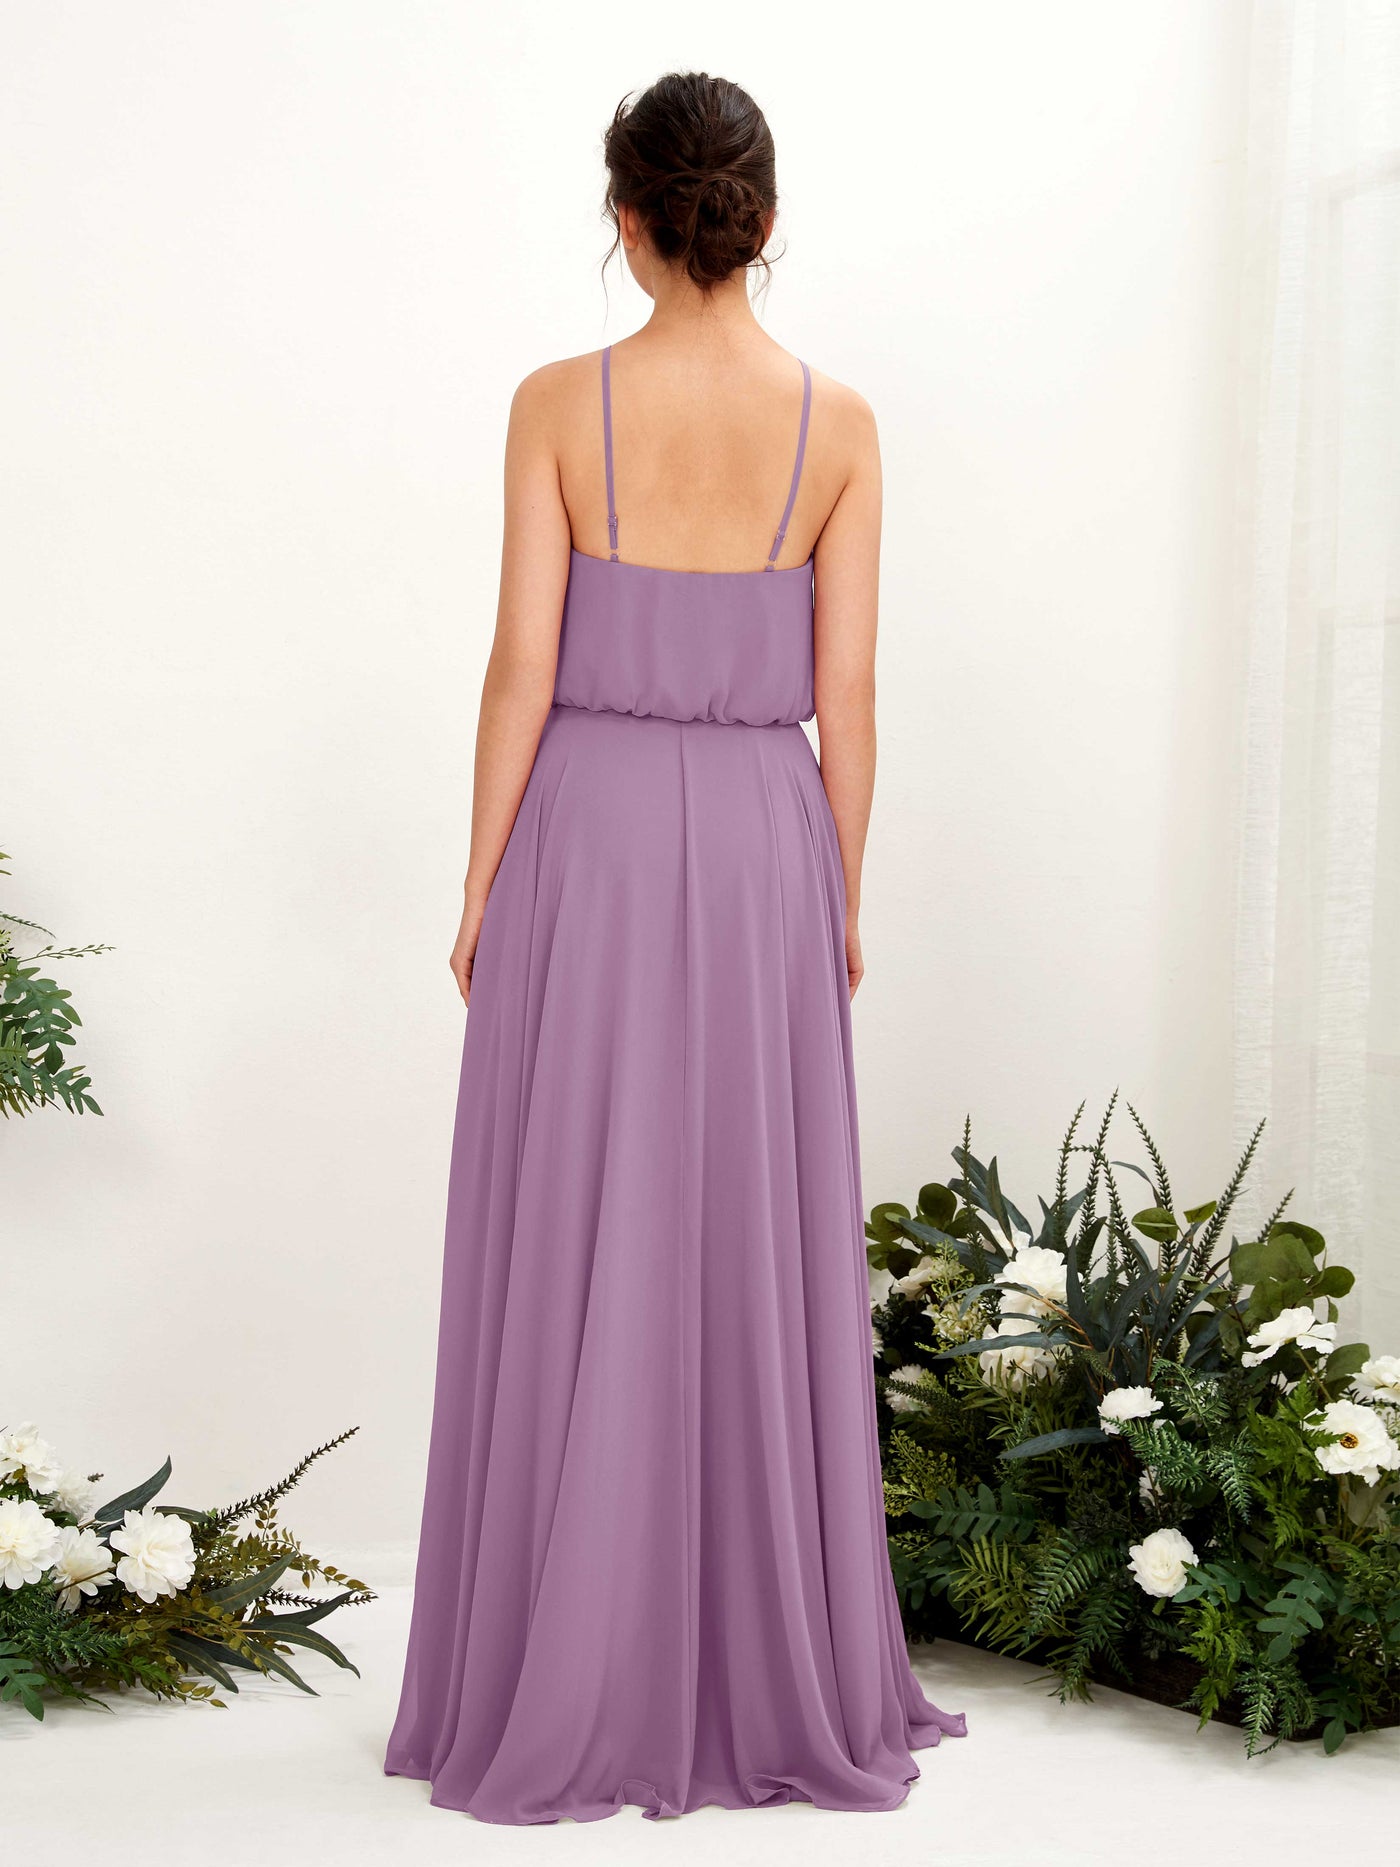 Orchid Mist Bridesmaid Dresses Bridesmaid Dress Ball Gown Chiffon Halter Full Length Sleeveless Wedding Party Dress (81223421)#color_orchid-mist